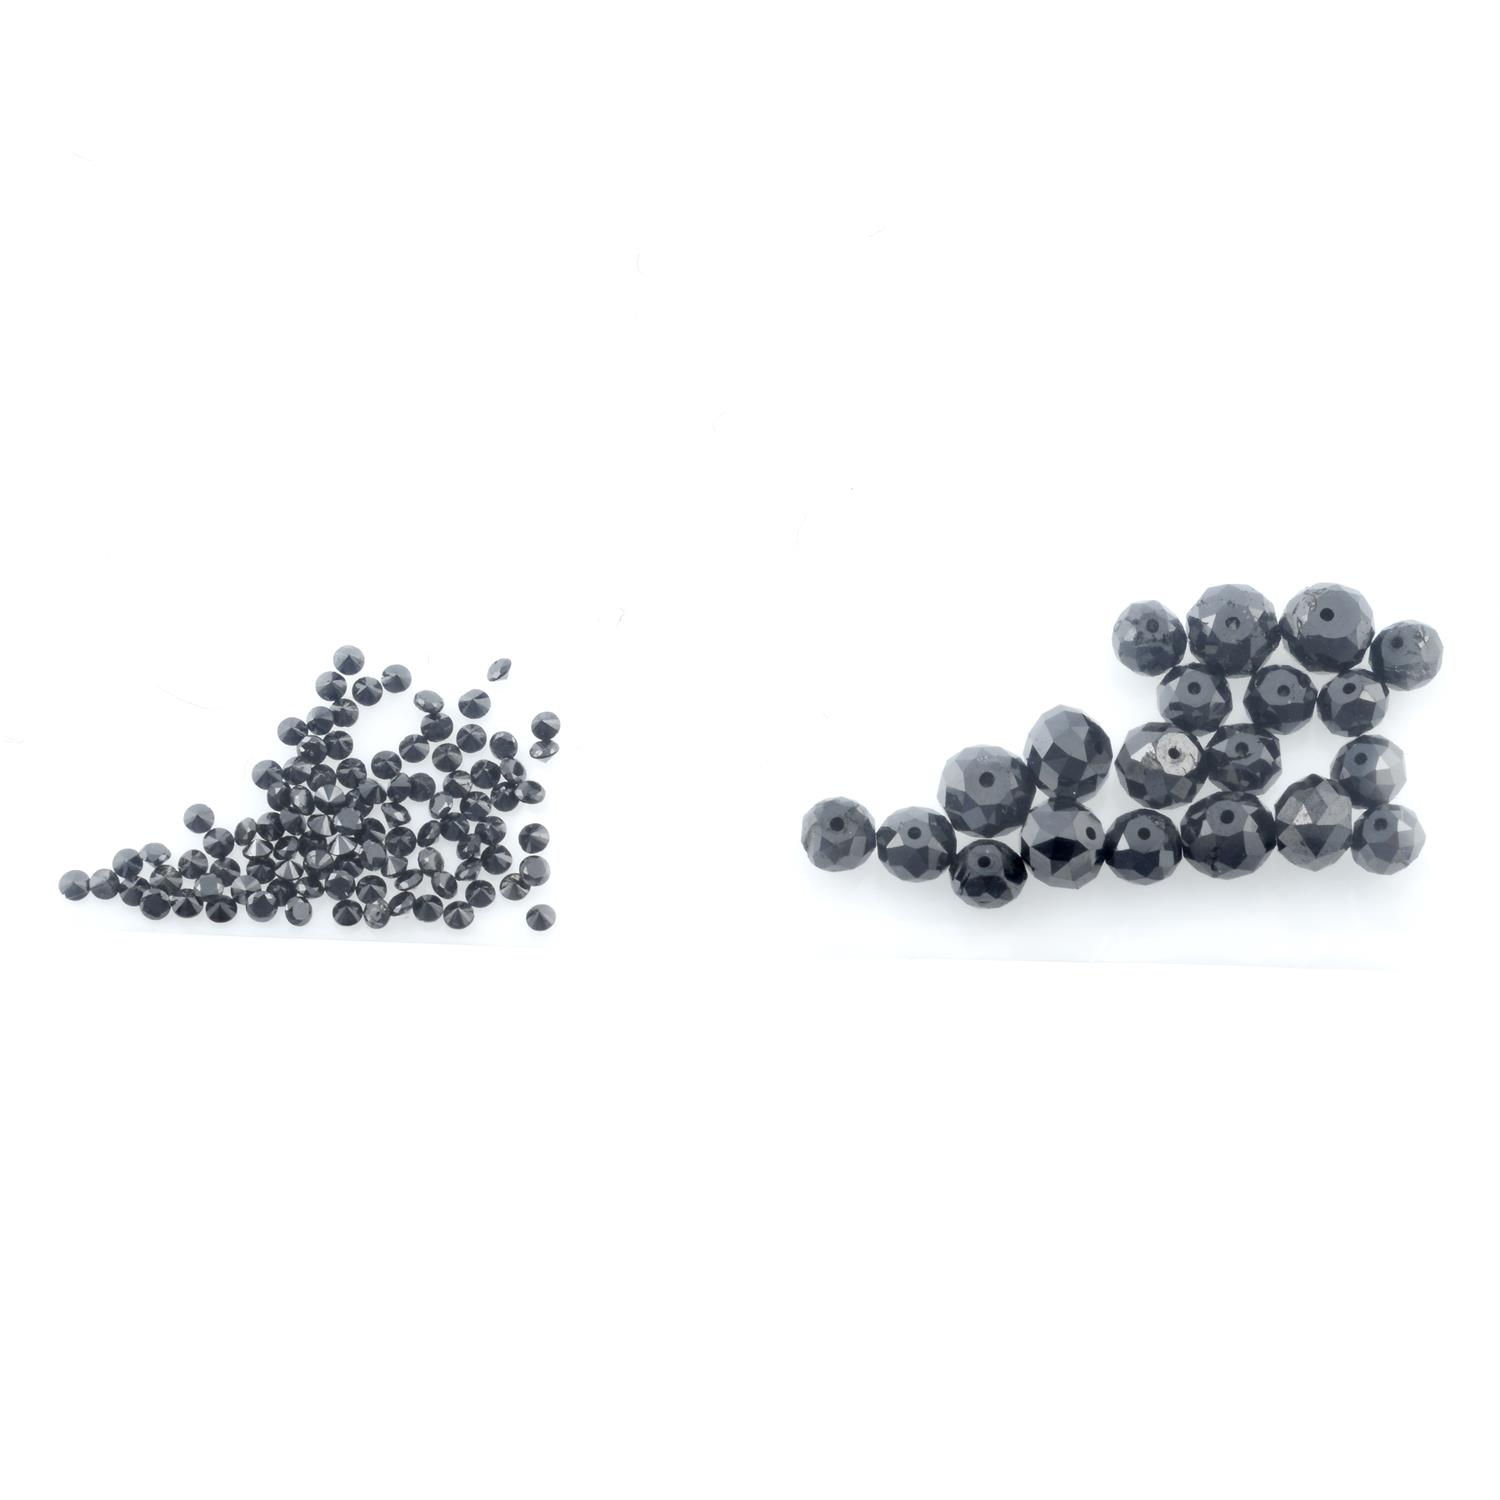 Selection of circular shape black gemstones and beads, weighing 11.03ct - Image 2 of 2